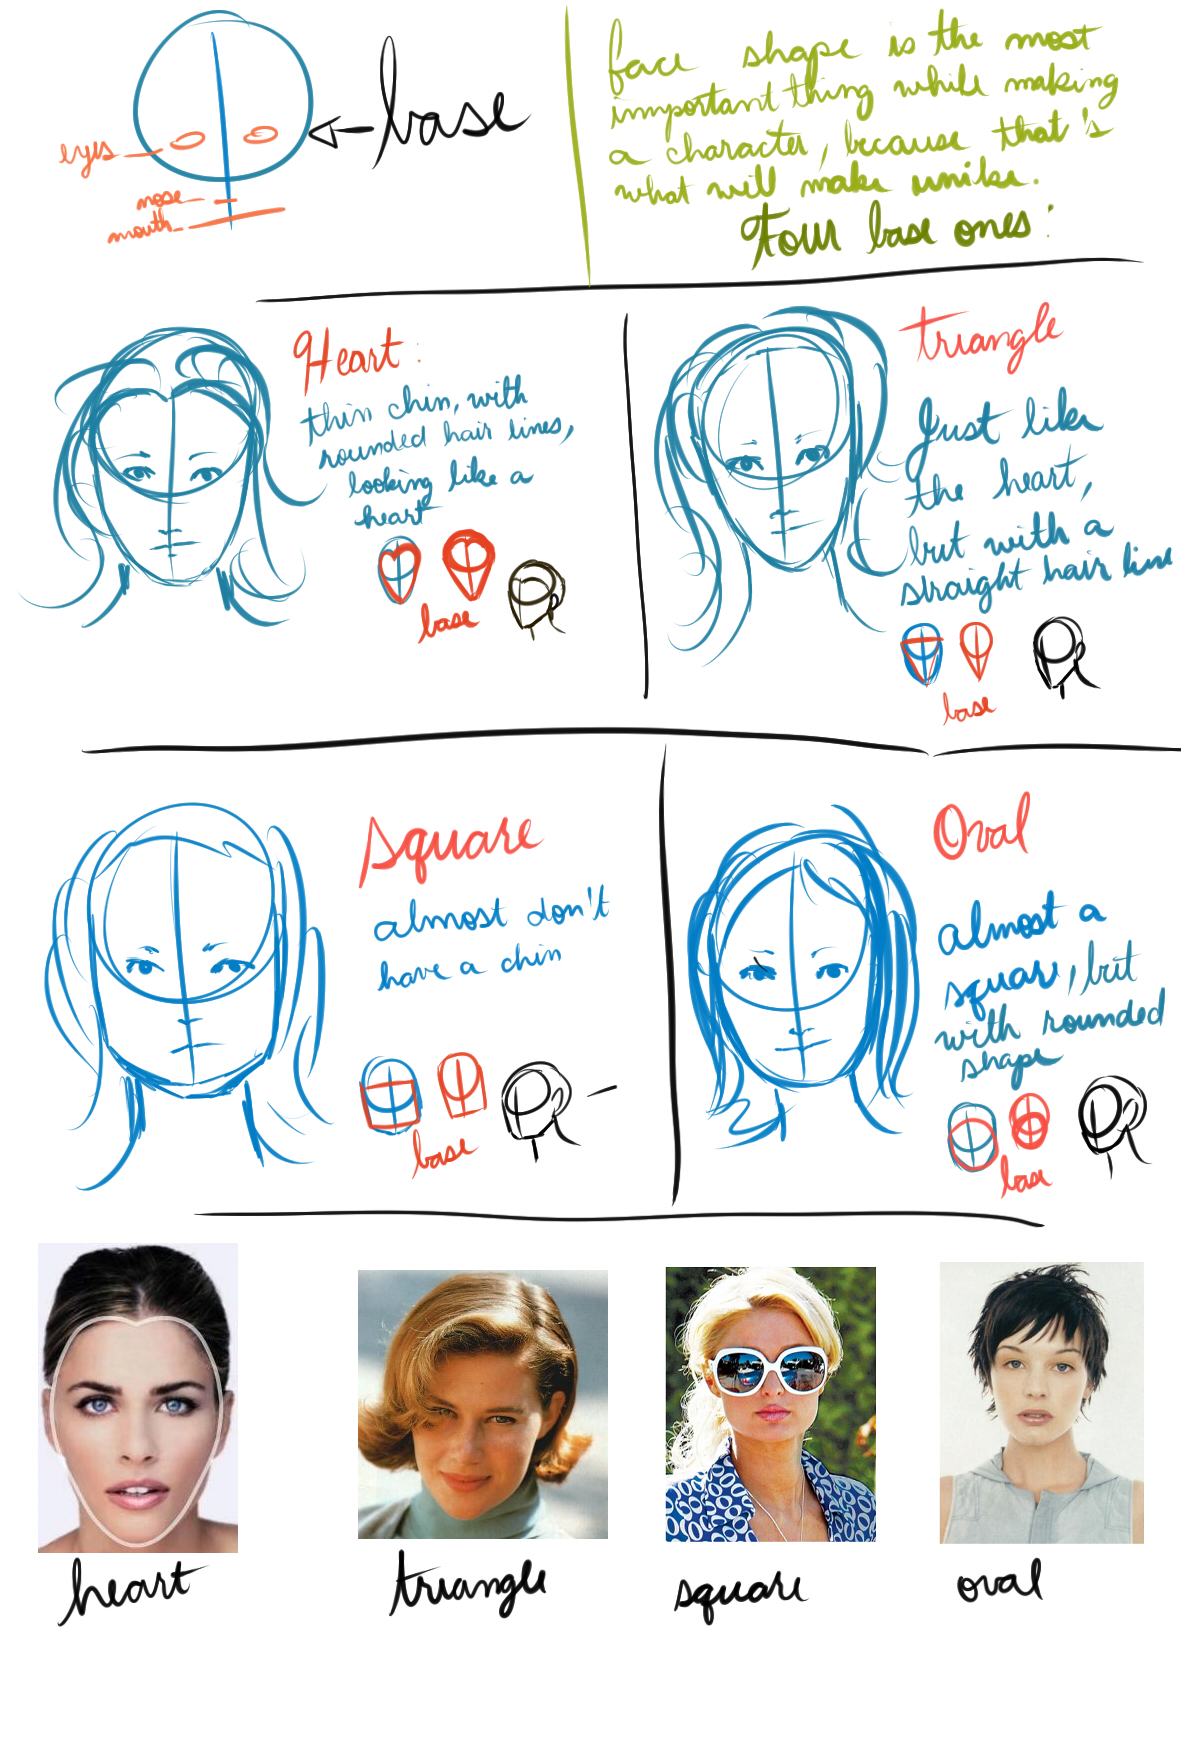 Face shape reference